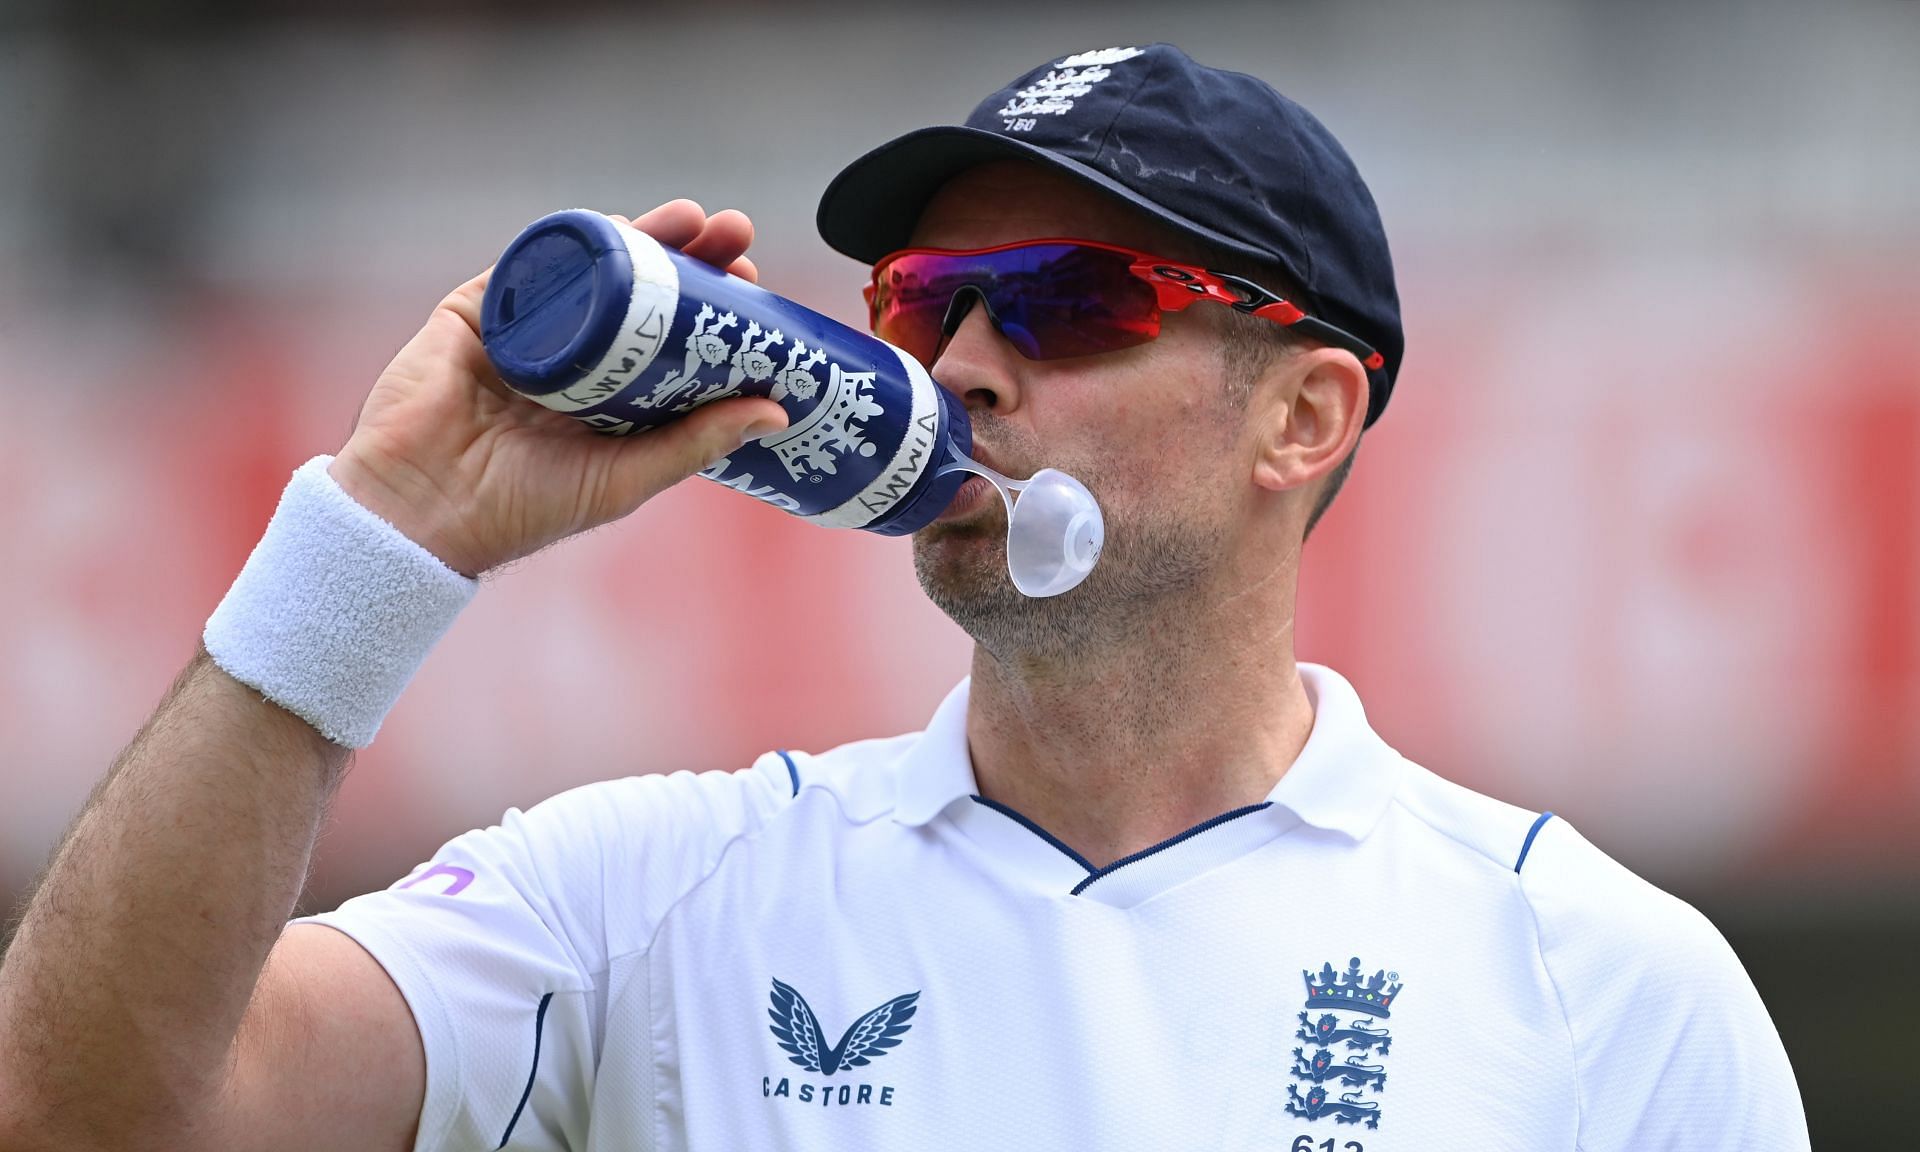 James Anderson had a remarkable return to the Test side. (Image Credits: Getty)